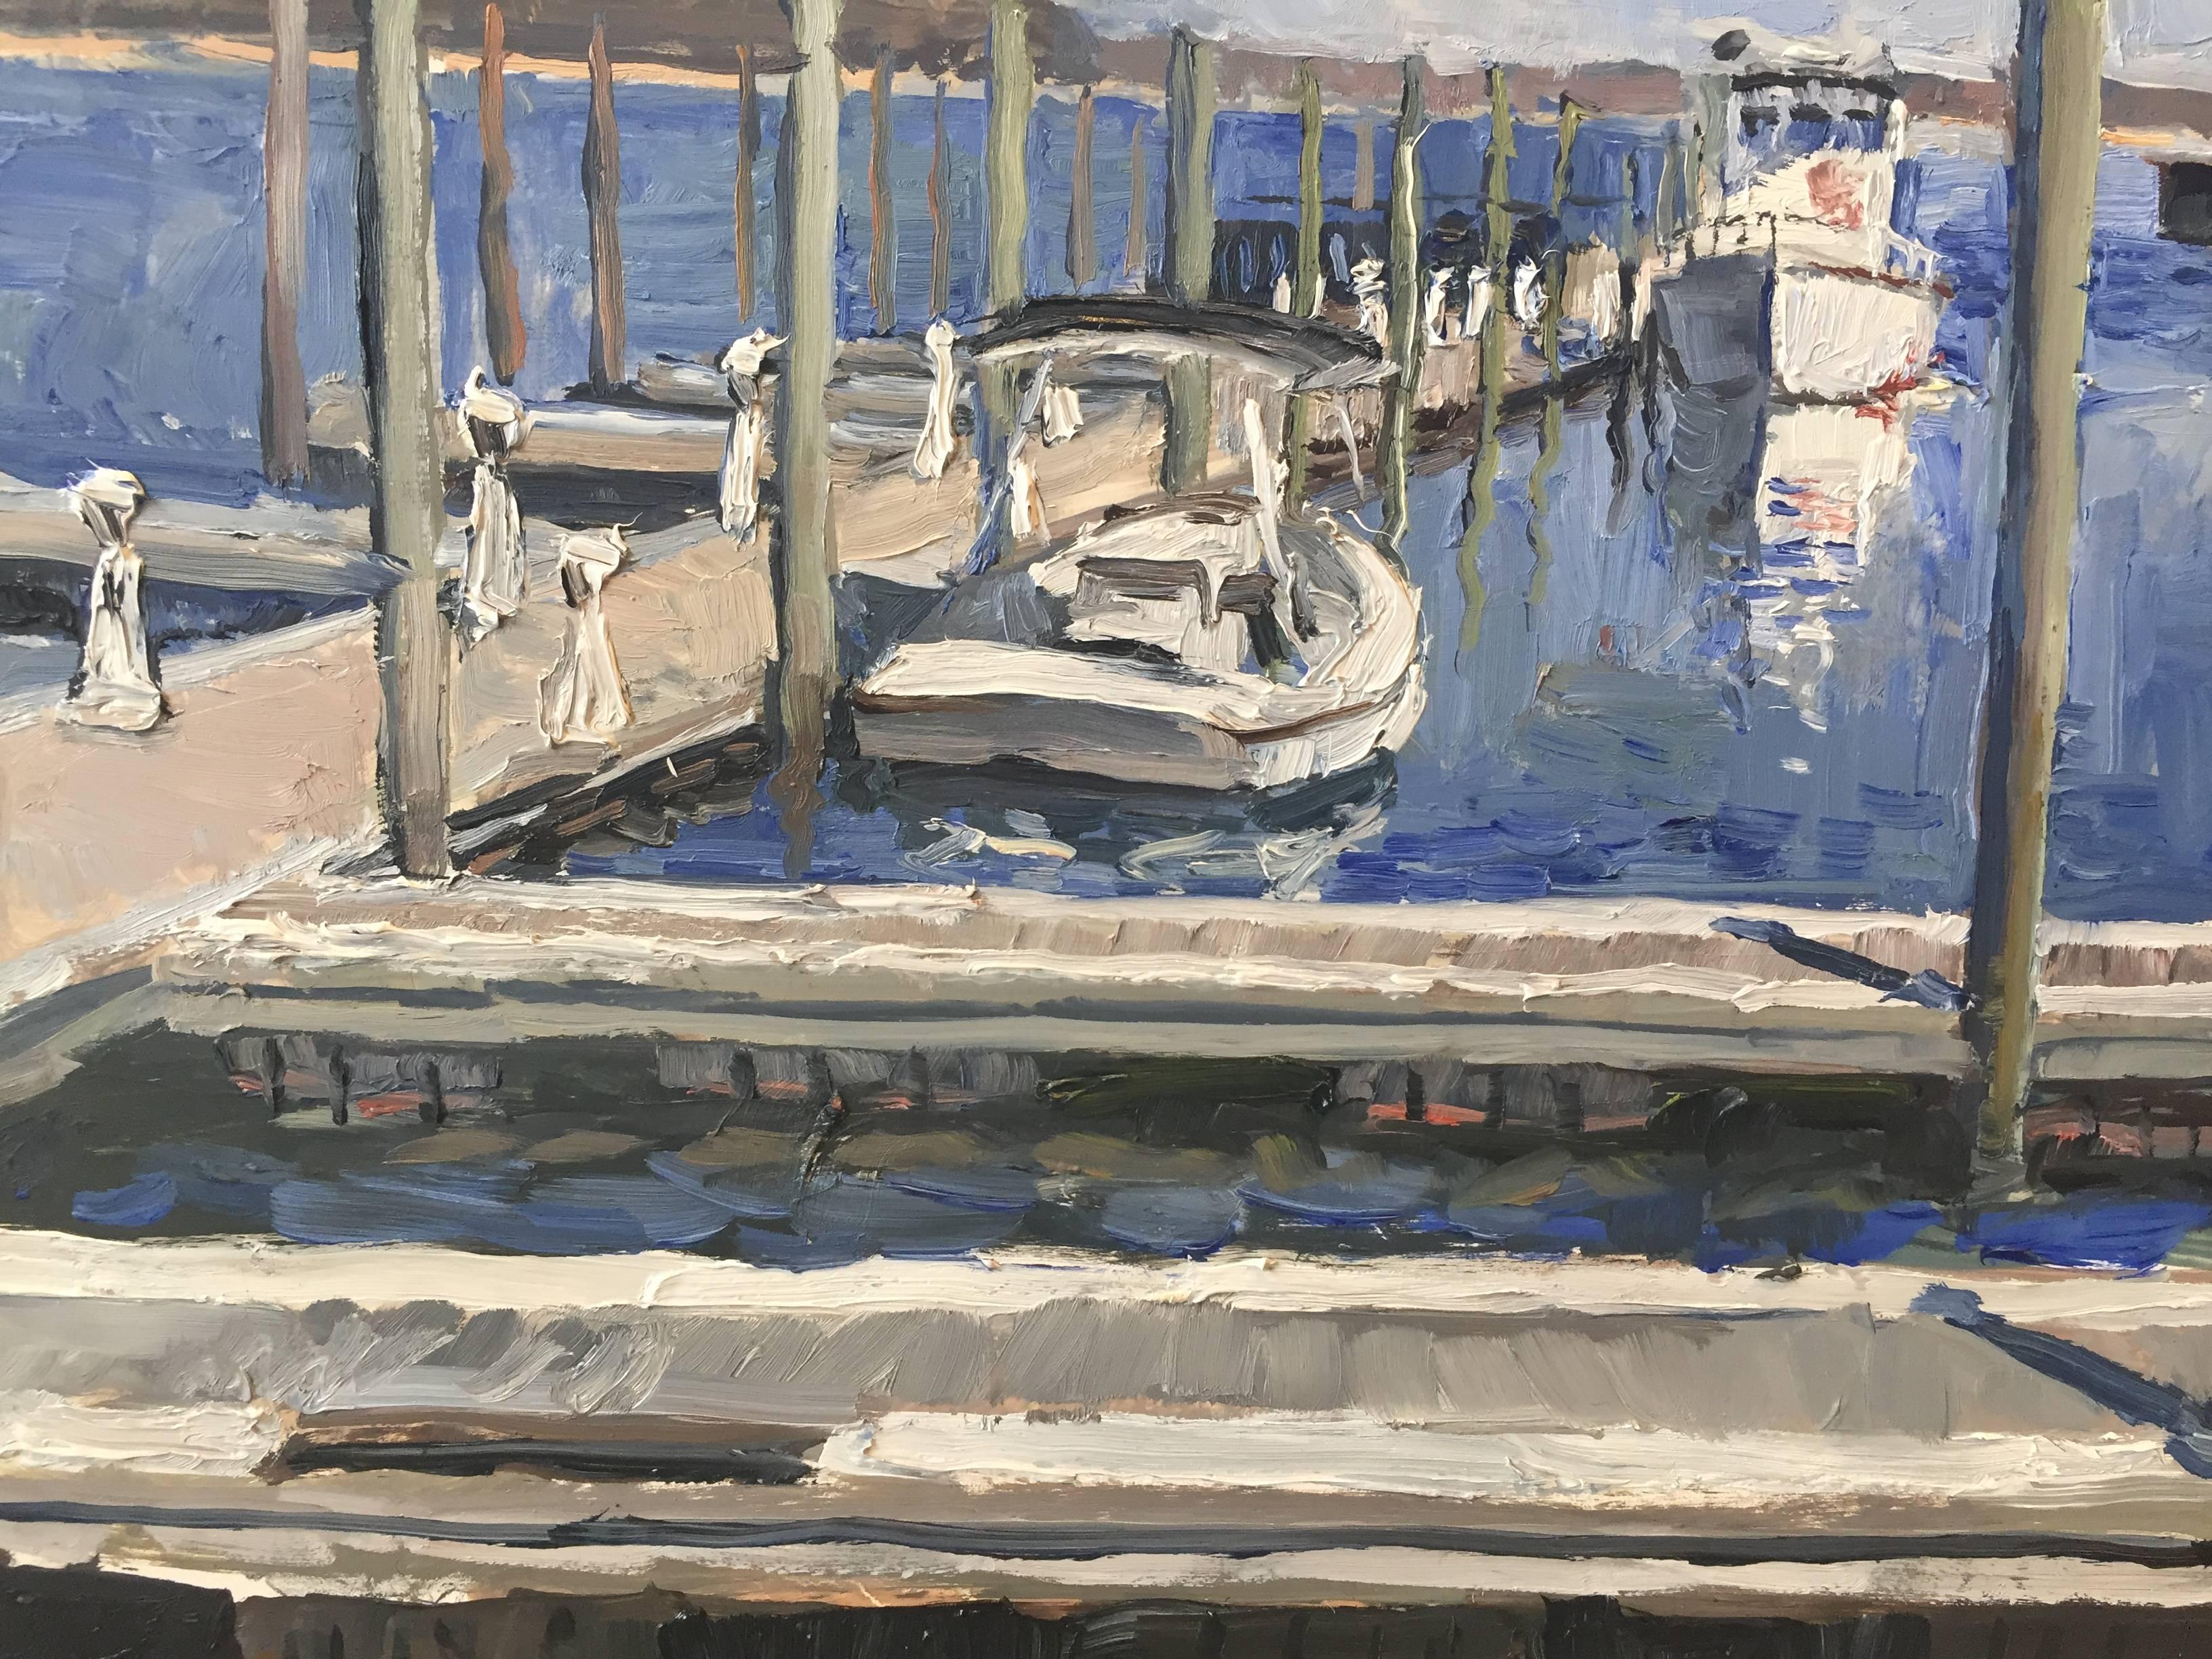 Painted from life, on Long Wharf in the village of Sag Harbor. Personett painted the near-empty marina which, in summer, is filled with boats. Cars are parked along the diagonal of the Wharf, looking at the sea. A classical painting style, with a